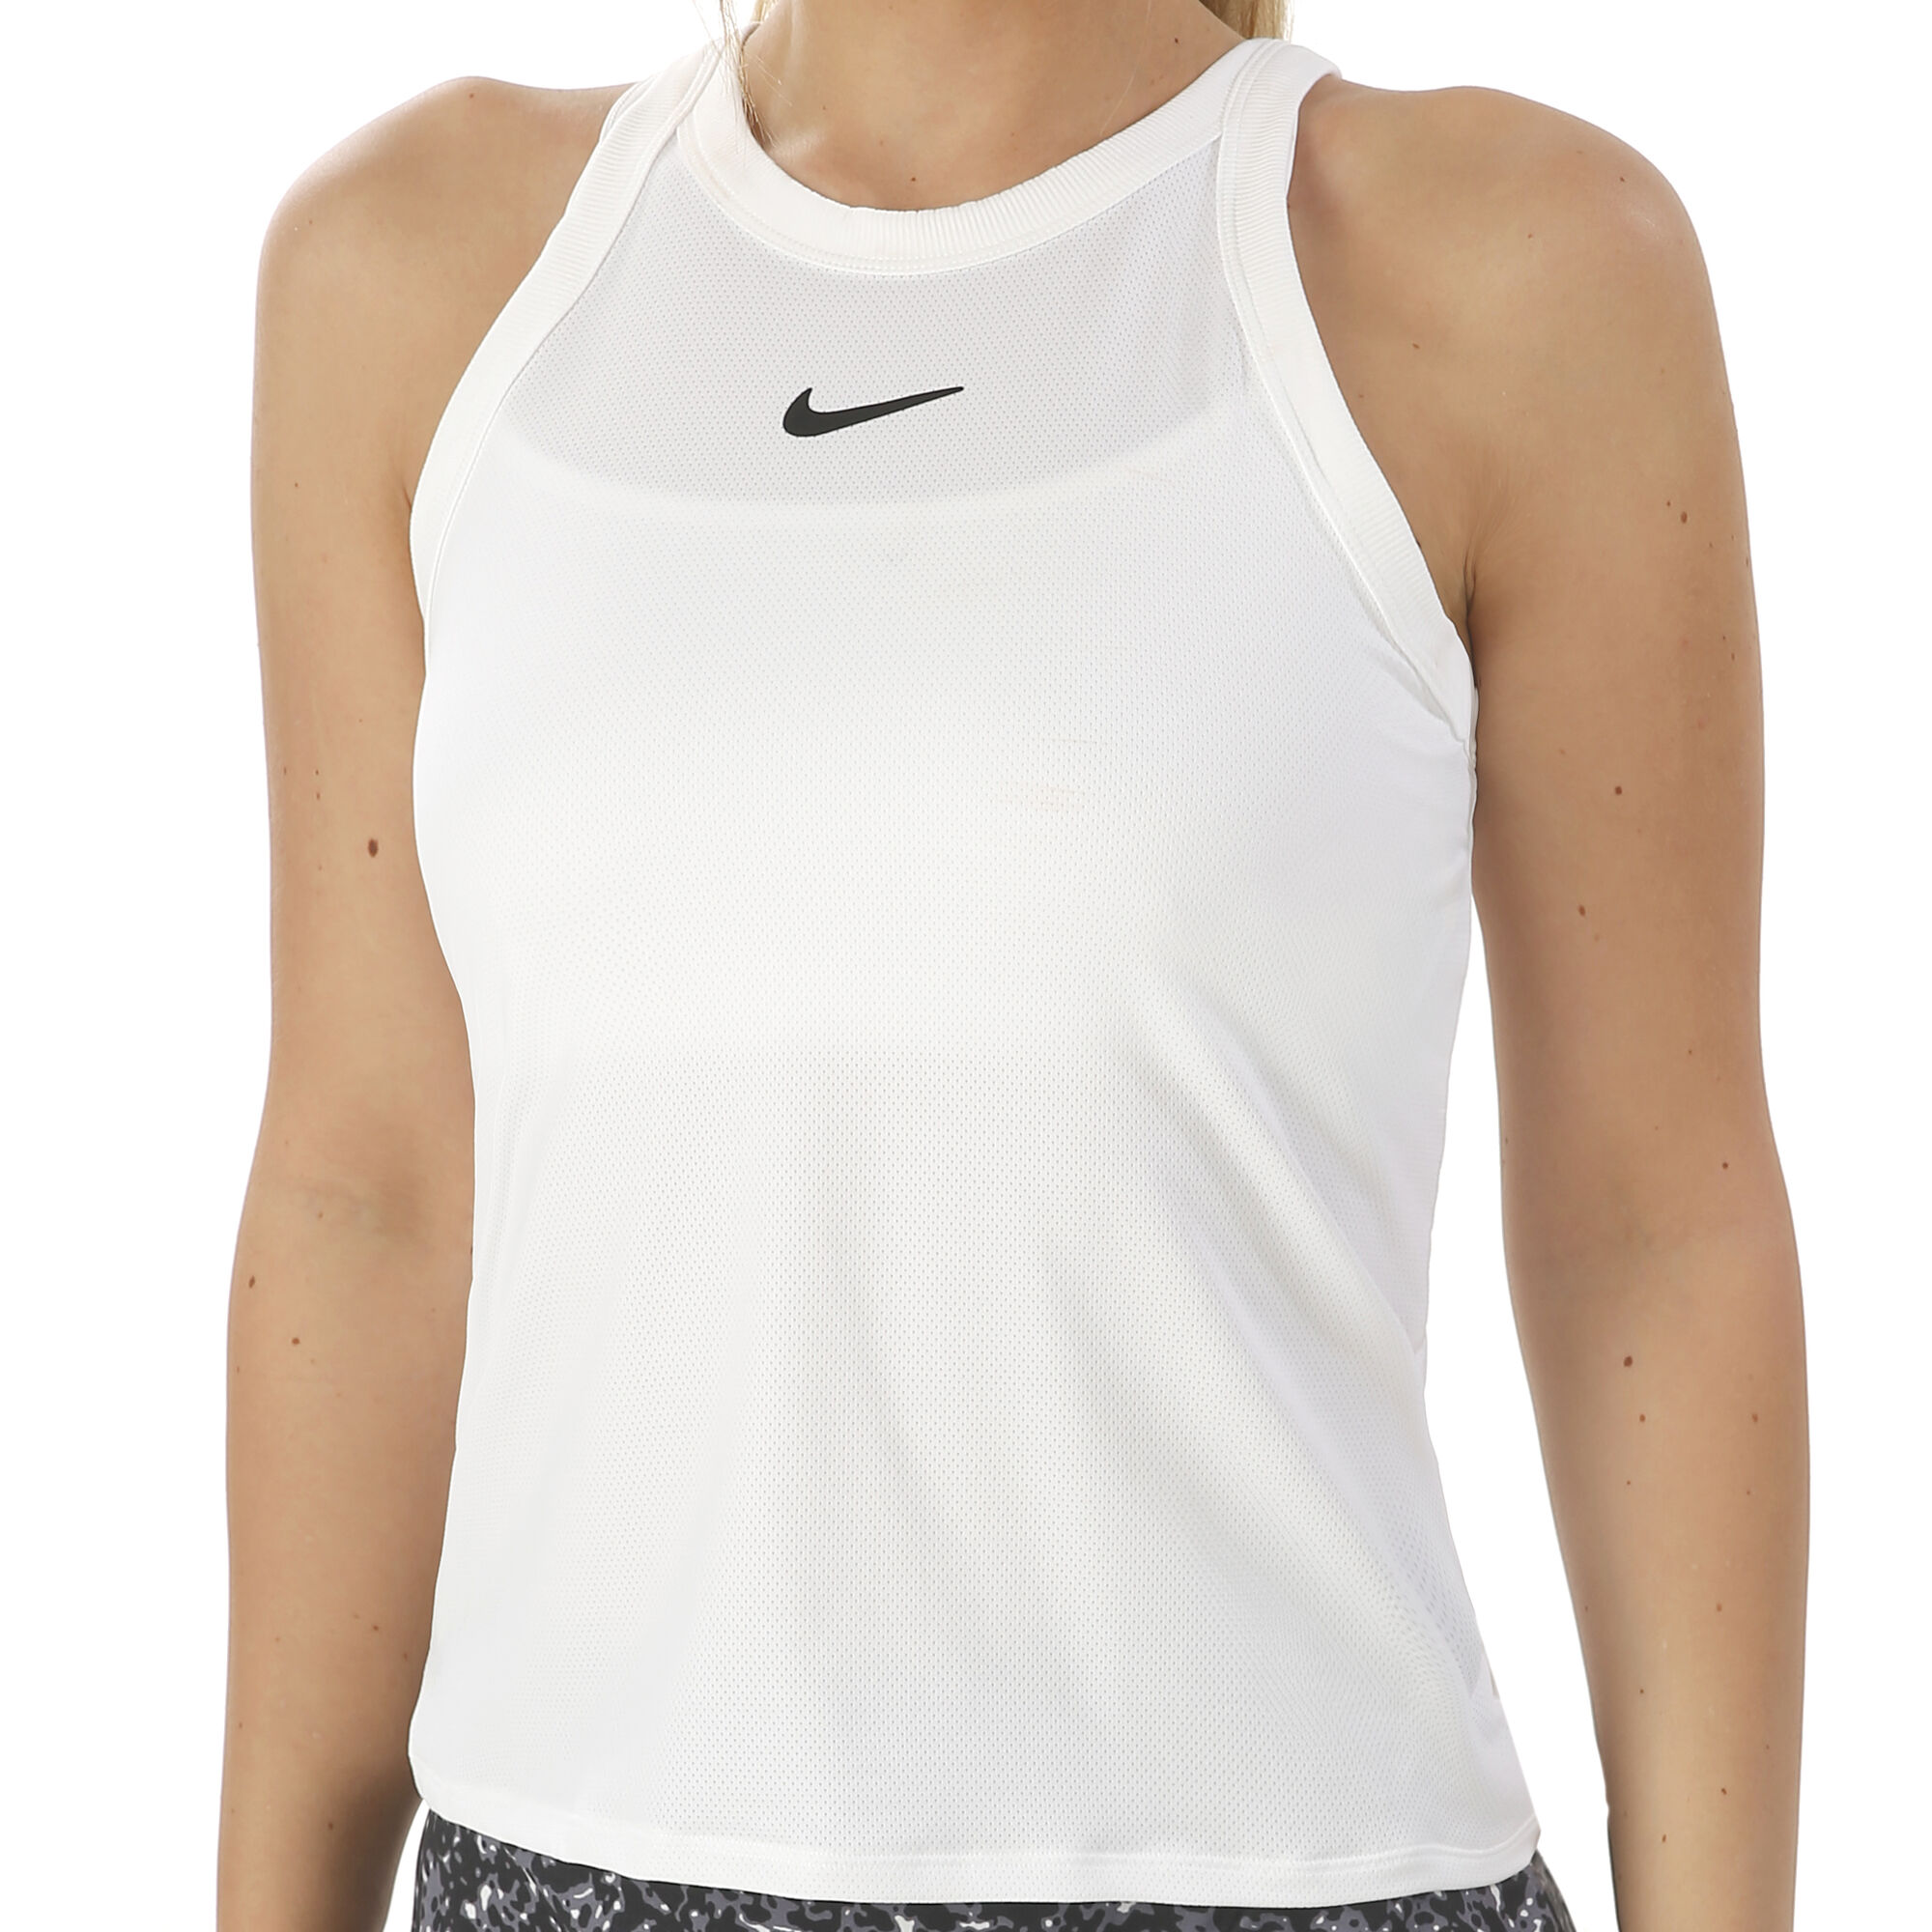 Nike Court Dry Mujeres - Blanco, Negro compra online | Tennis-Point